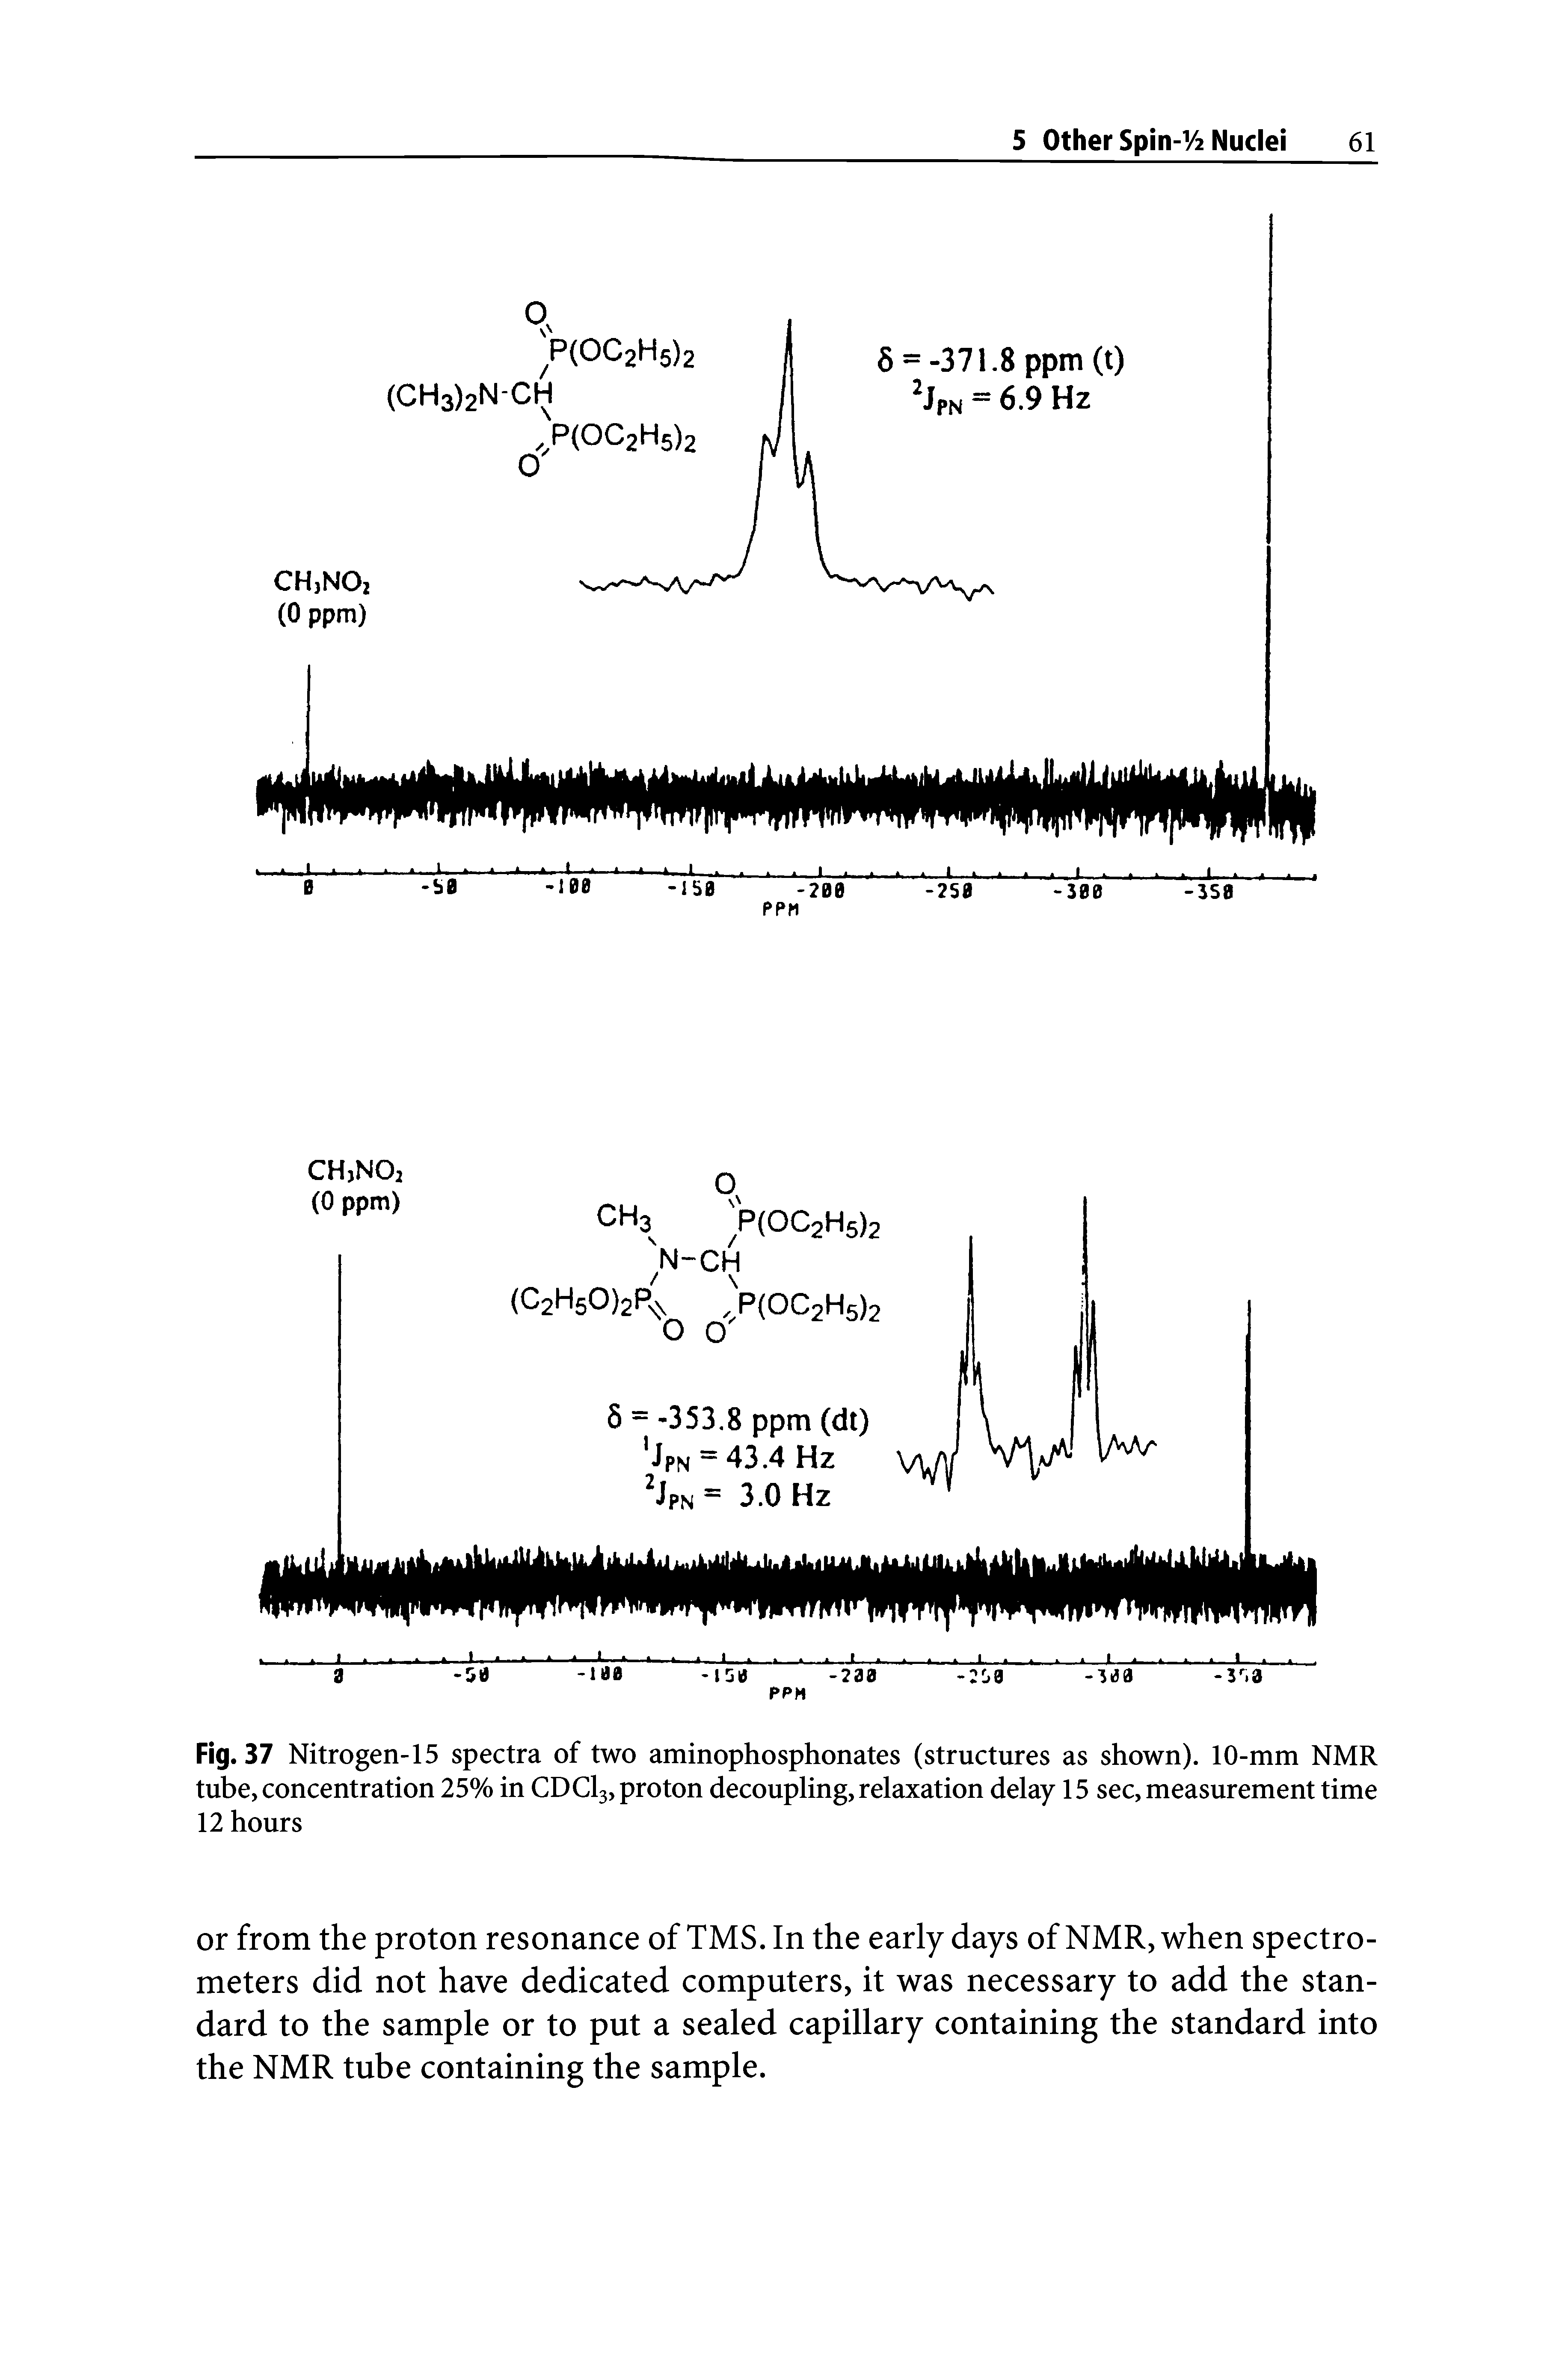 Fig. 37 Nitrogen-15 spectra of two aminophosphonates (structures as shown). 10-mm NMR tube, concentration 25% in CDC13, proton decoupling, relaxation delay 15 sec, measurement time 12 hours...